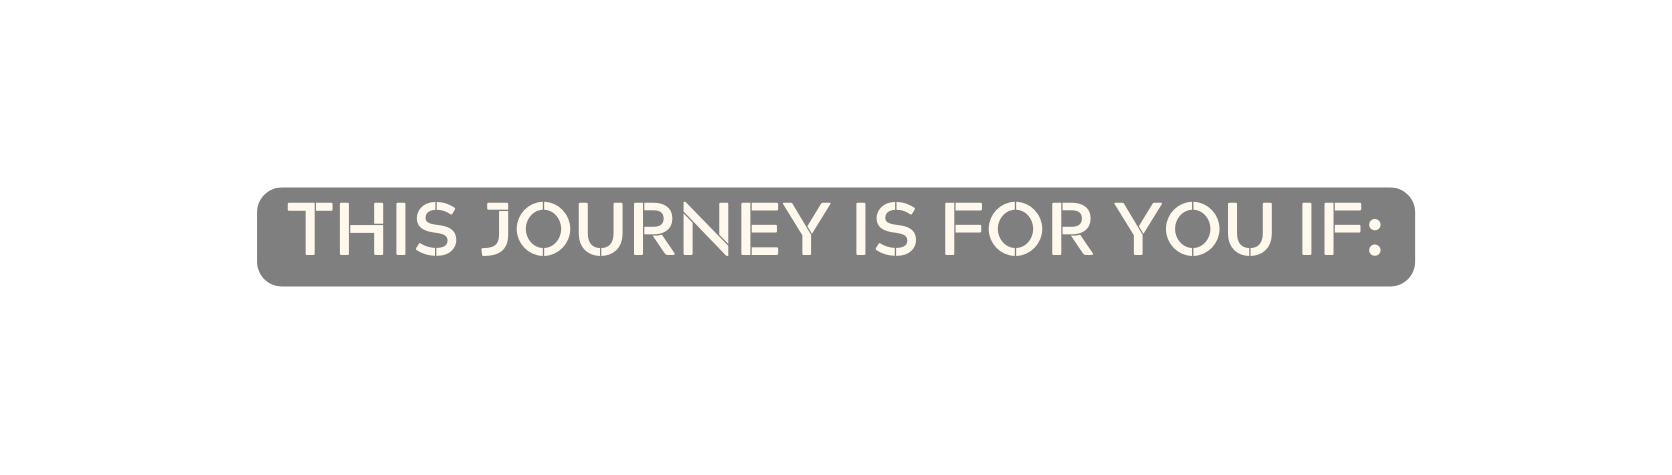 THIS JOURNEY IS FOR YOU IF